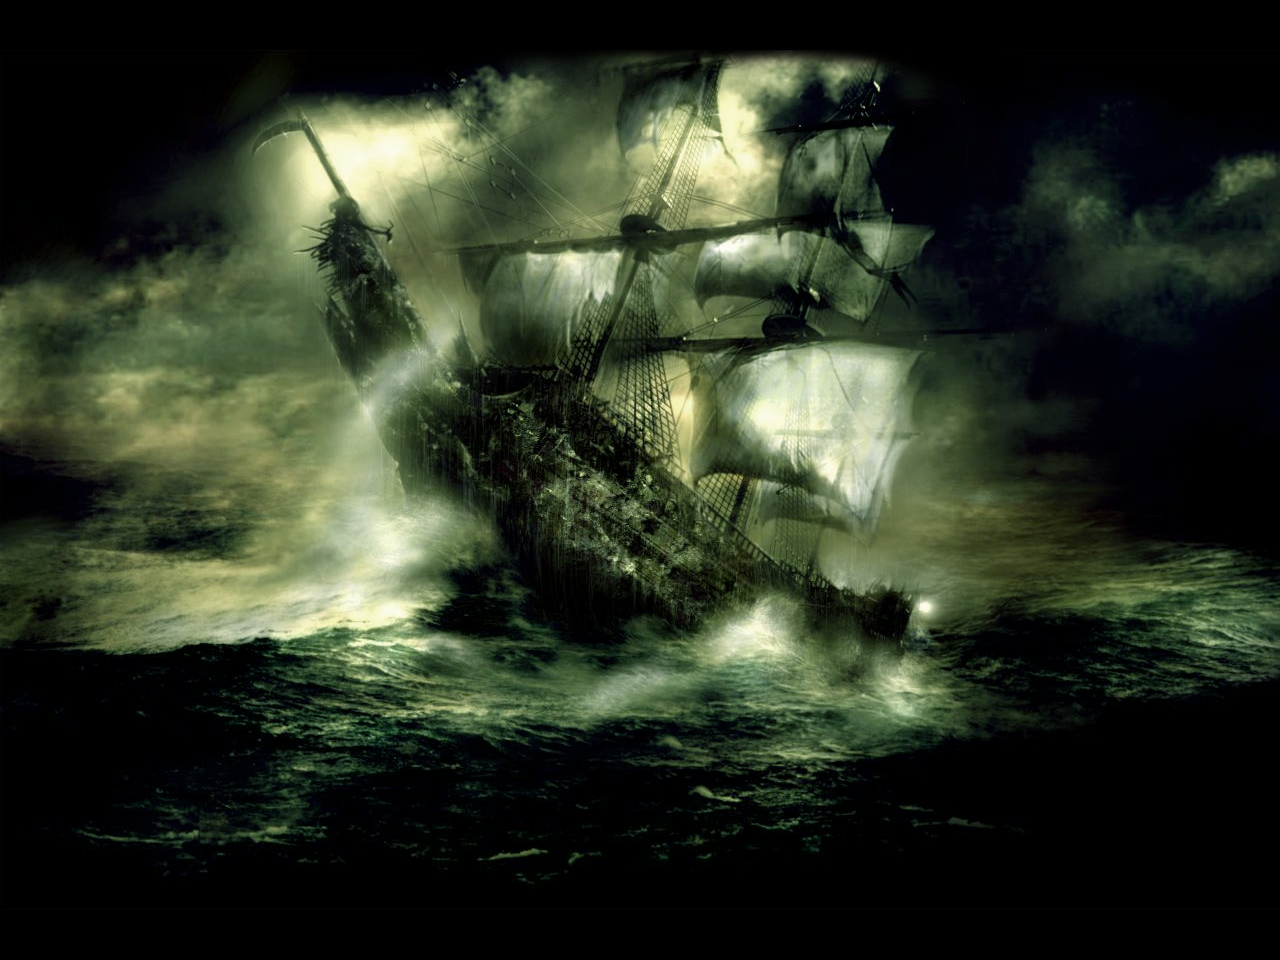 Sinking Ship in the Storm